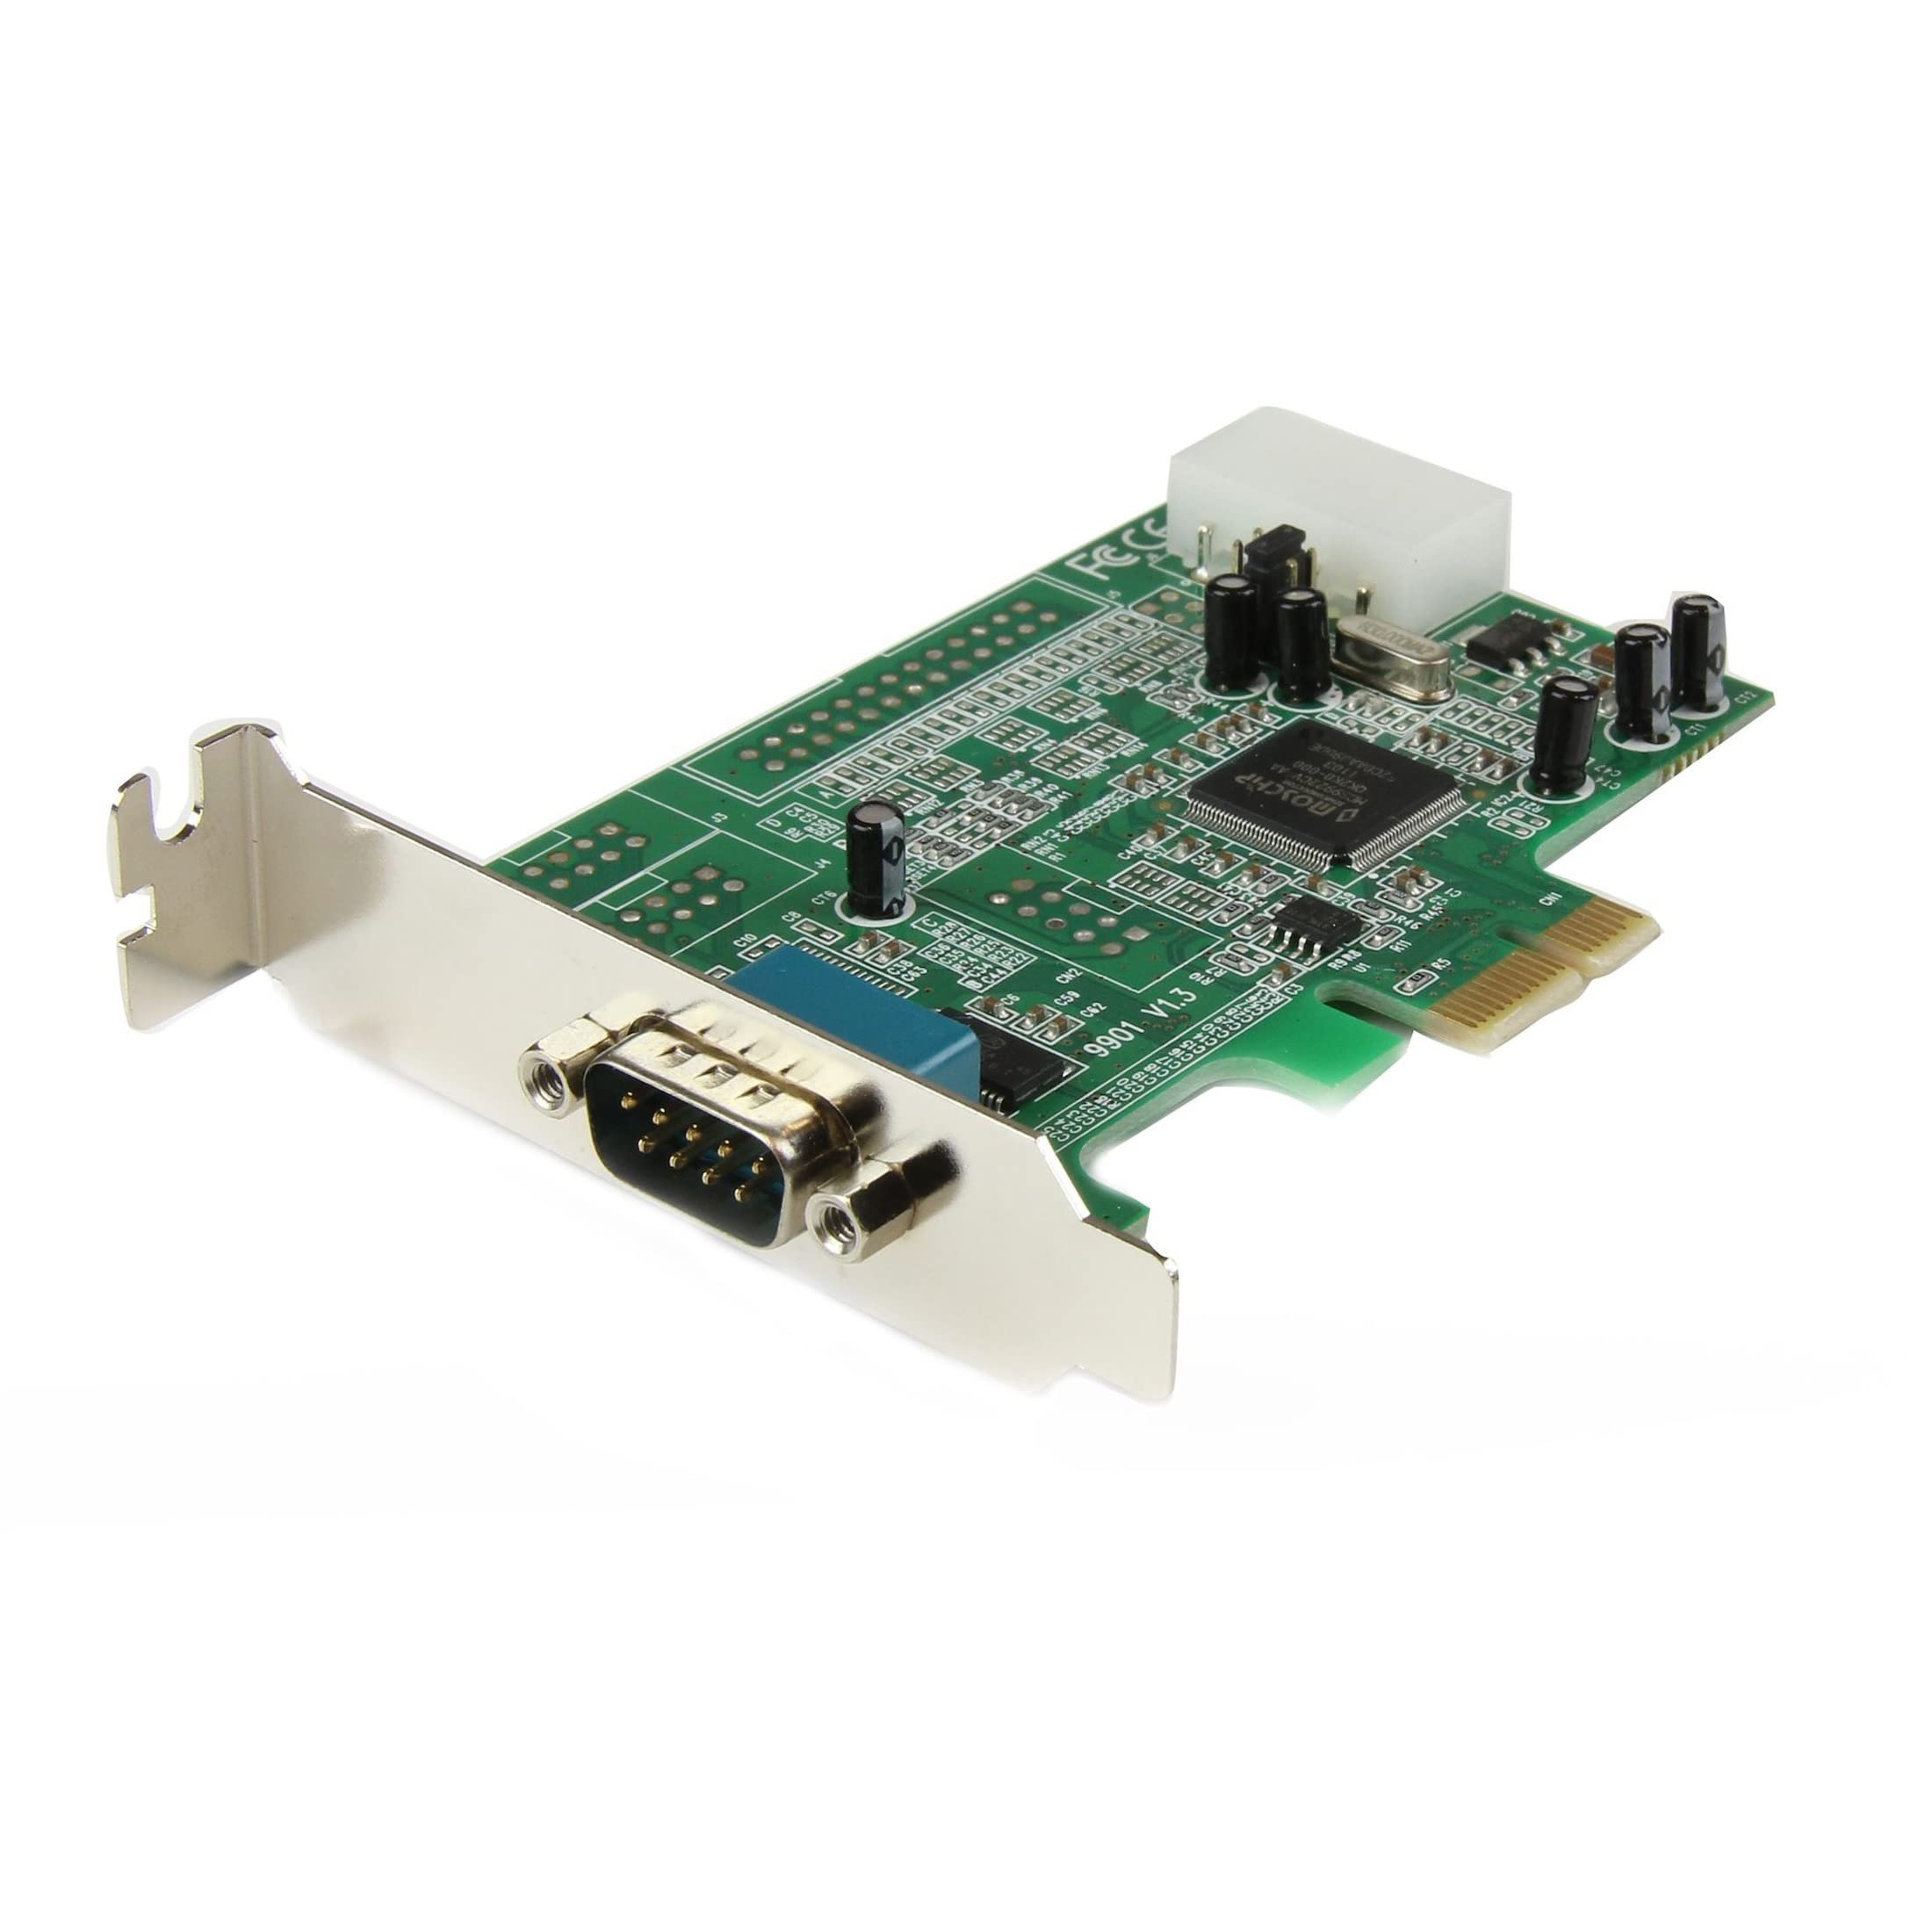 Book Cover StarTech.com 1-port PCI Express RS232 Serial Adapter Card - PCIe RS232 Serial Host Controller Card - PCIe to Serial DB9 - 16550 UART - Low Profile Expansion Card - Windows & Linux (PEX1S553LP)